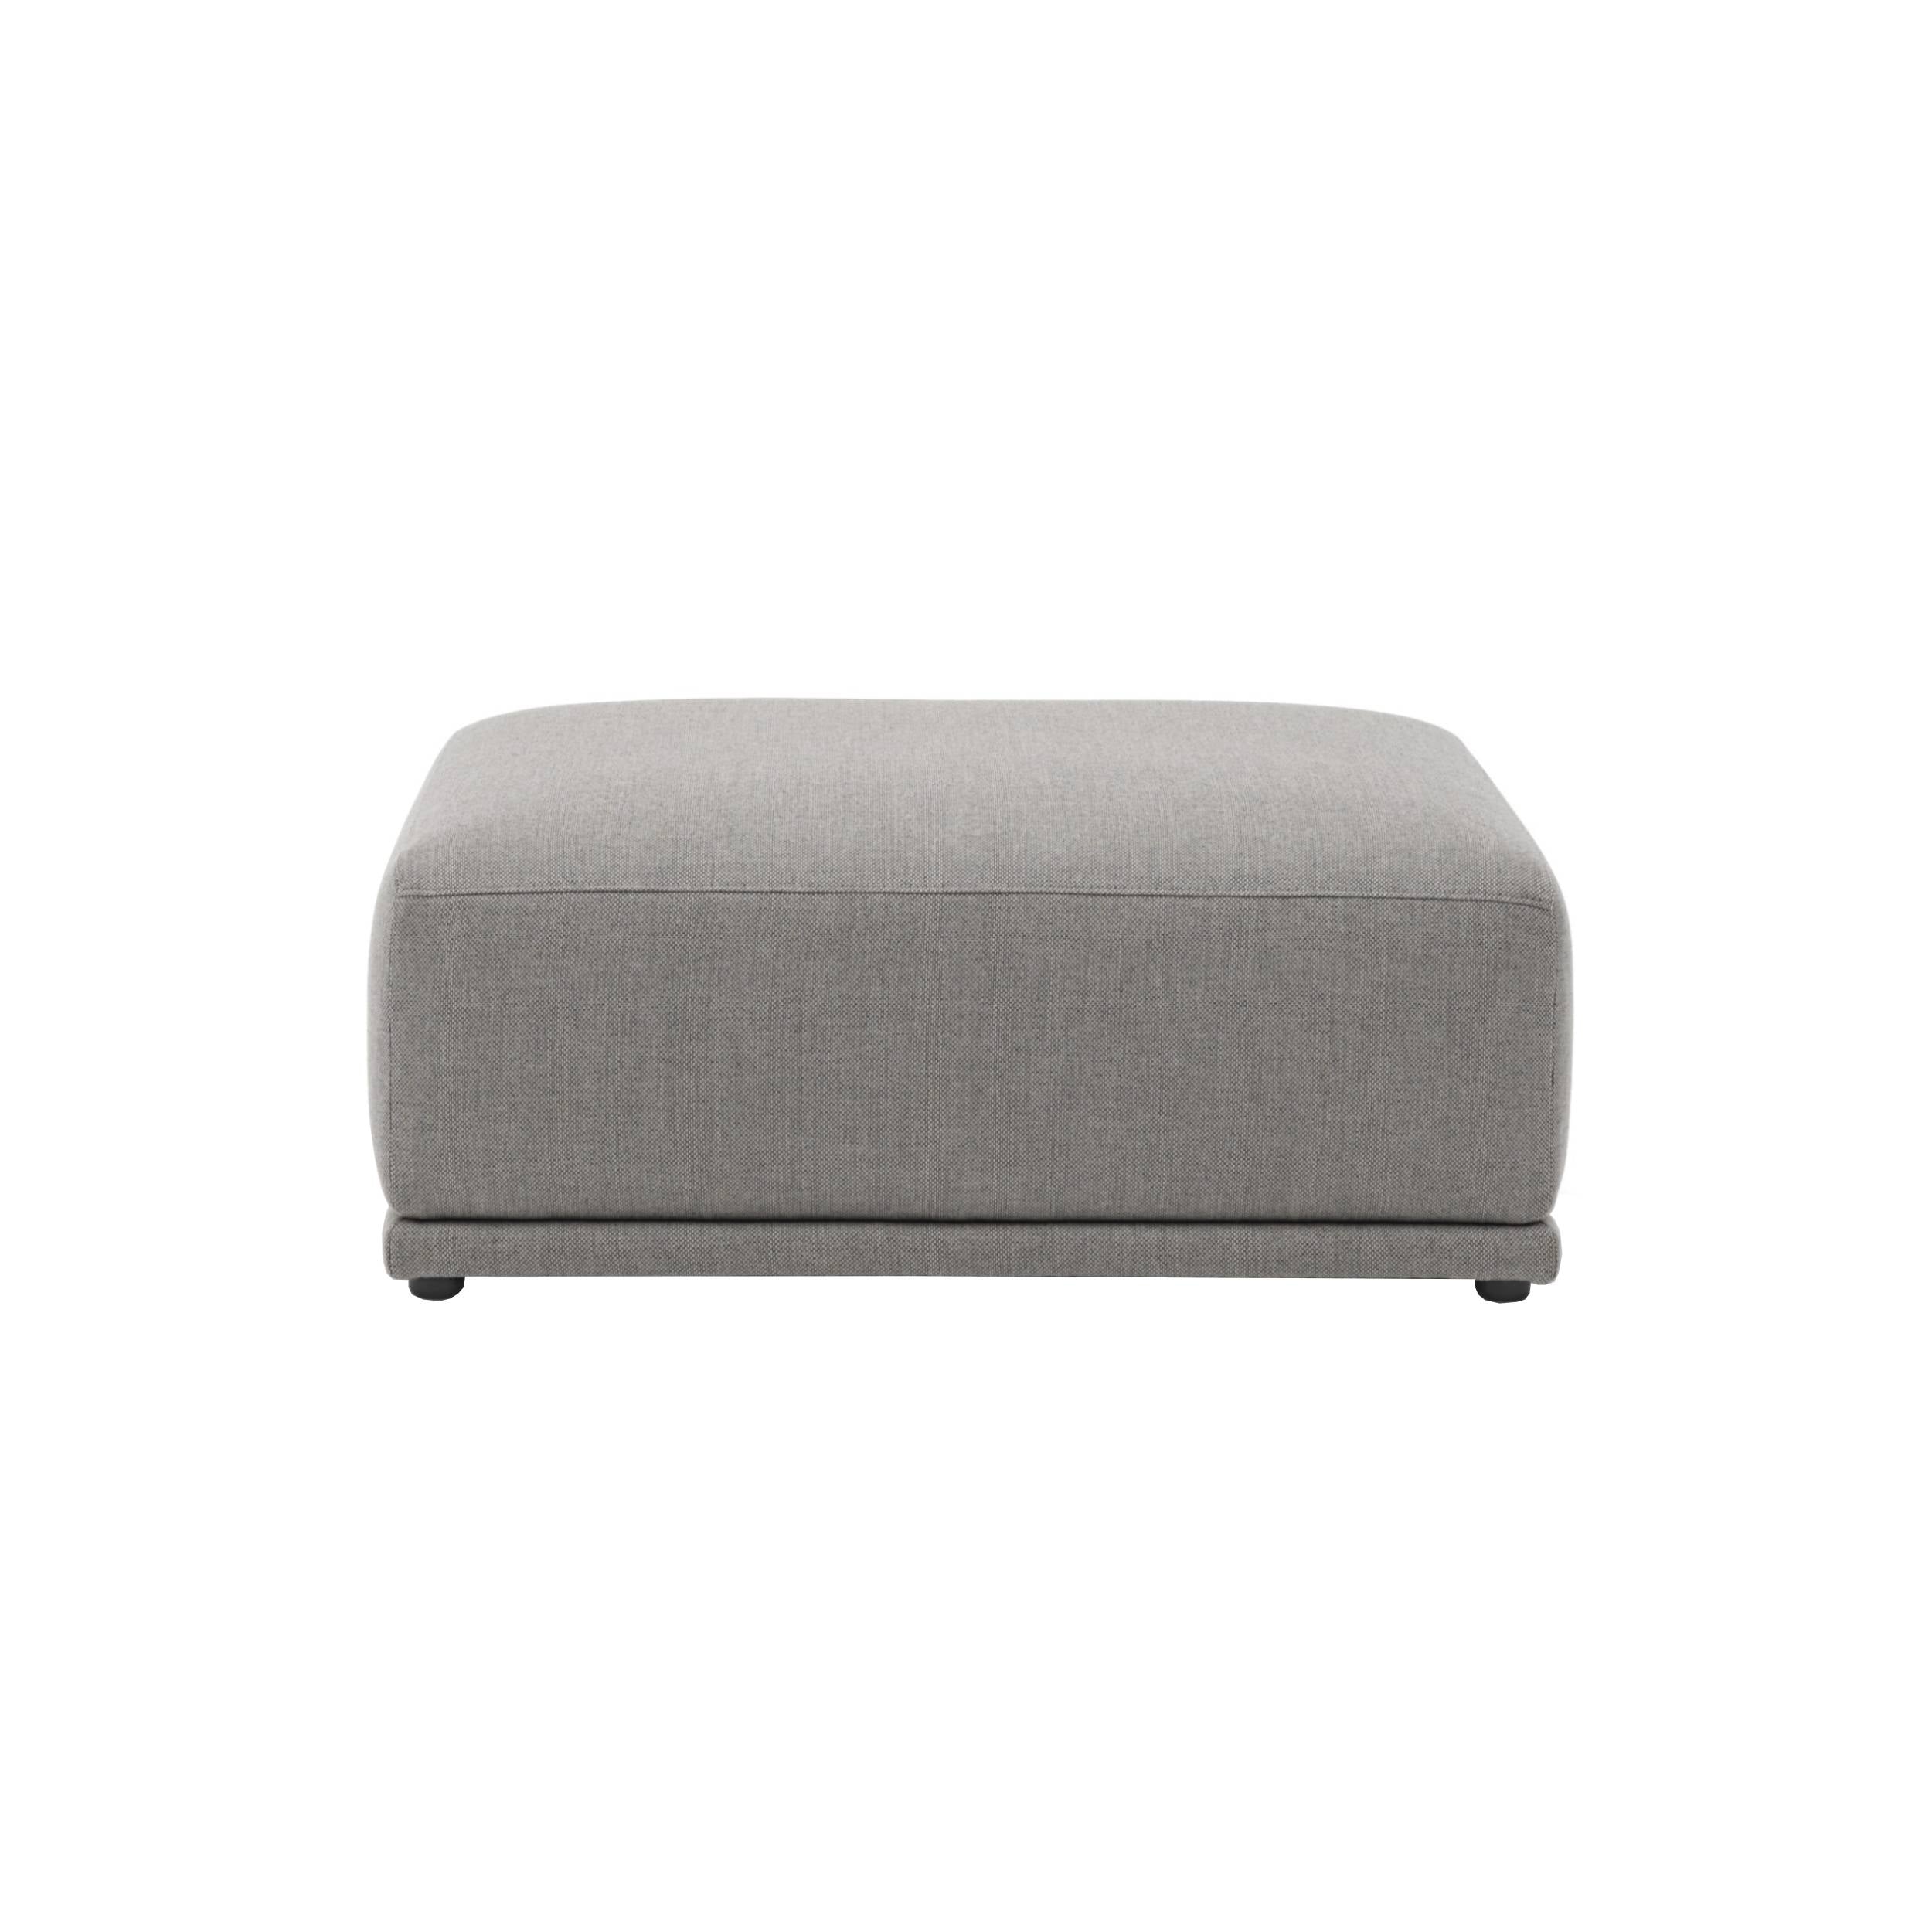 Connect Soft Sofa Modules: Ottoman I + Re-Wool 128